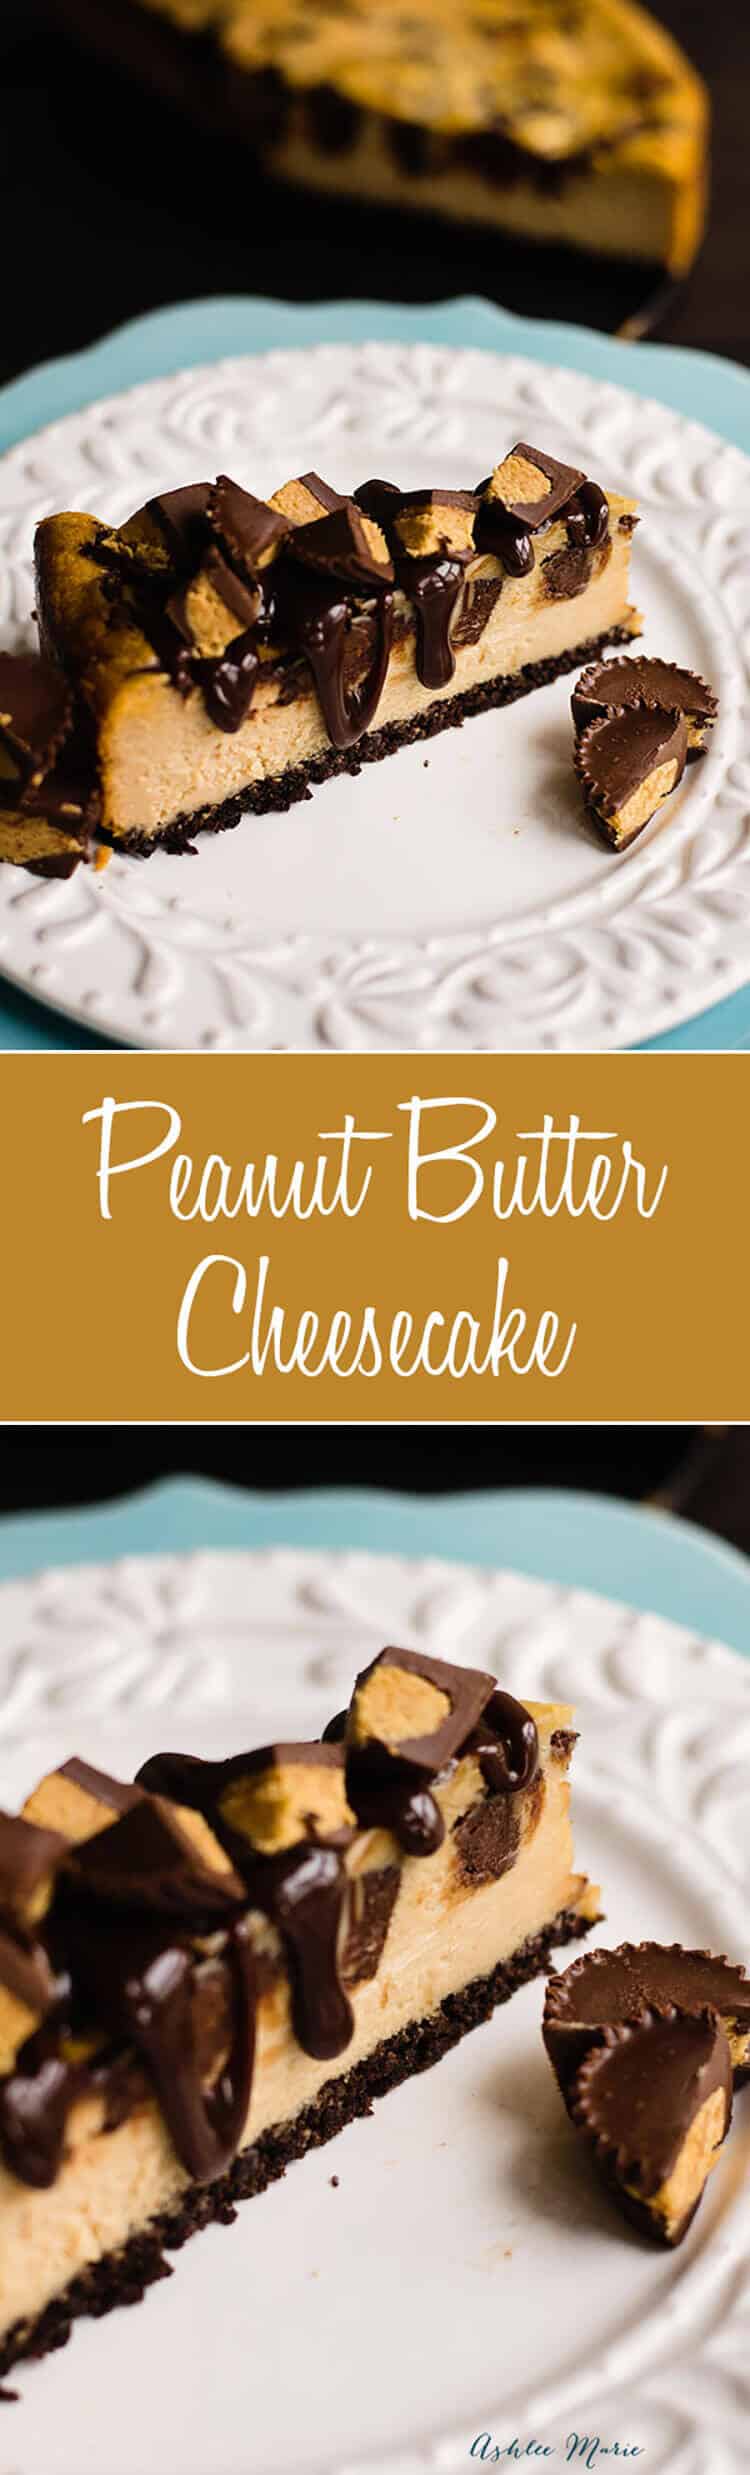 this peanut butter flavored cheesecake has a chocolate crust, with chunks of peanut butter cups and topped with hot fudge